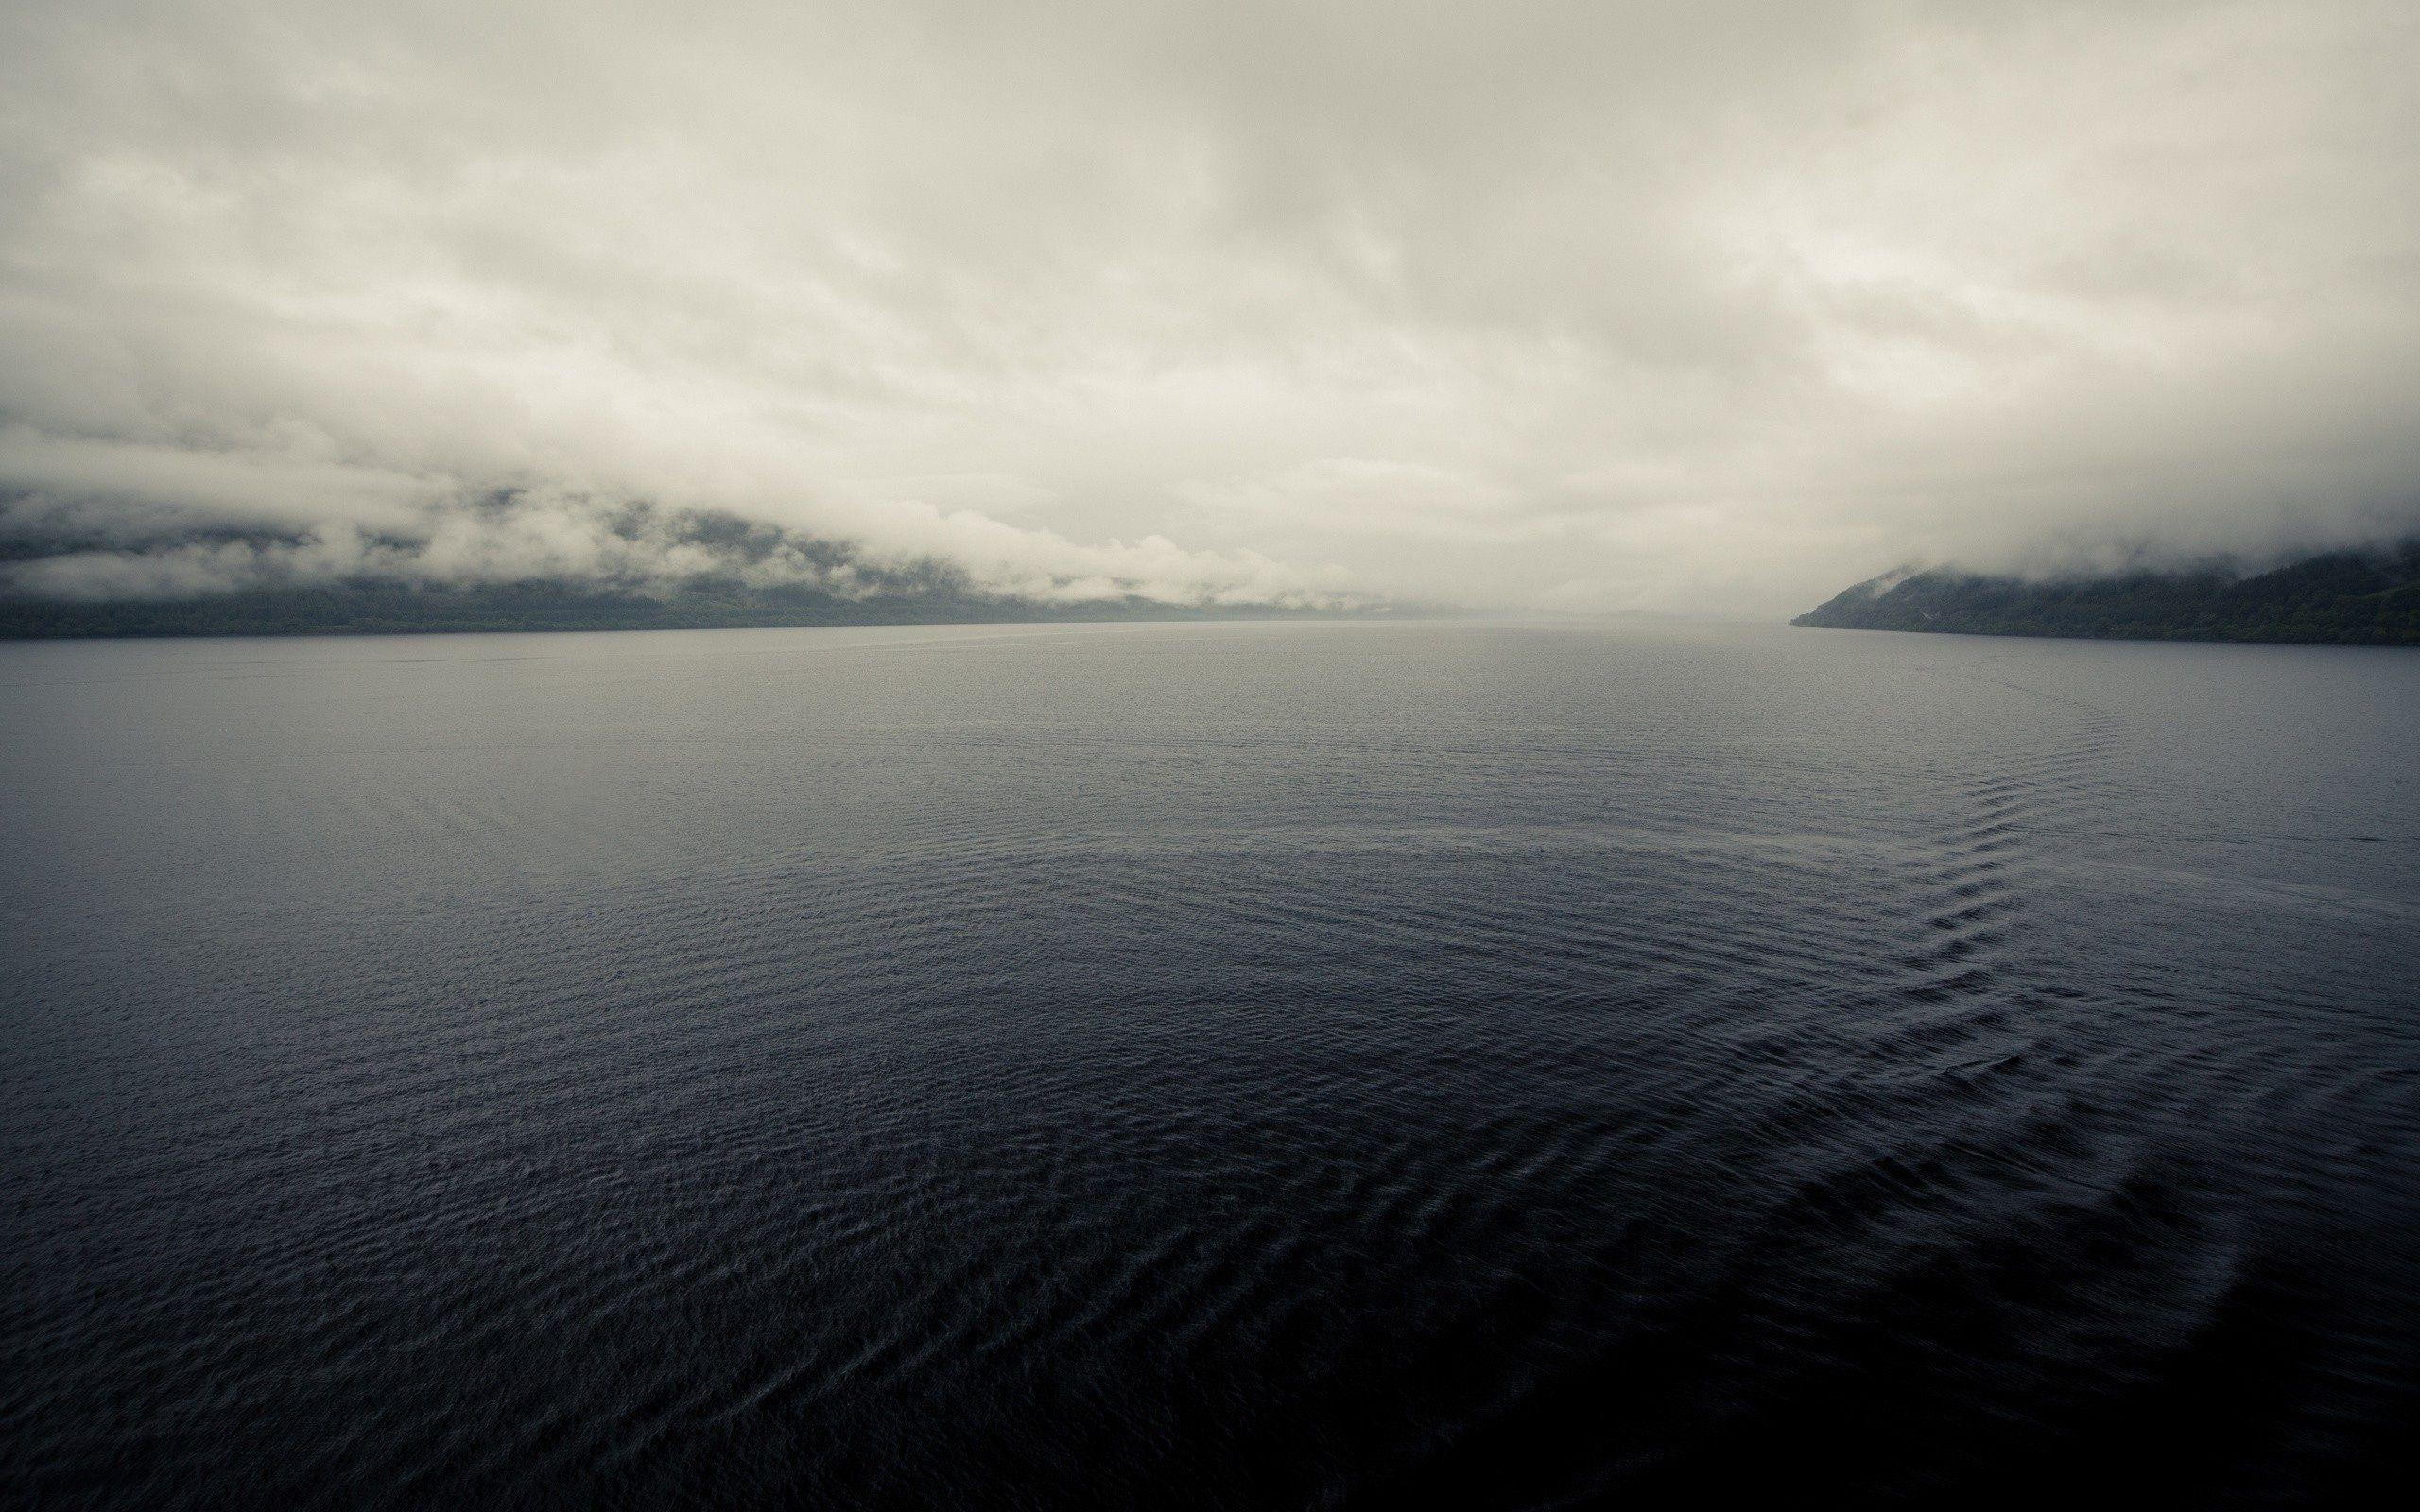 Lake Loch Ness Wallpaper. Daily inspiration art photo, picture